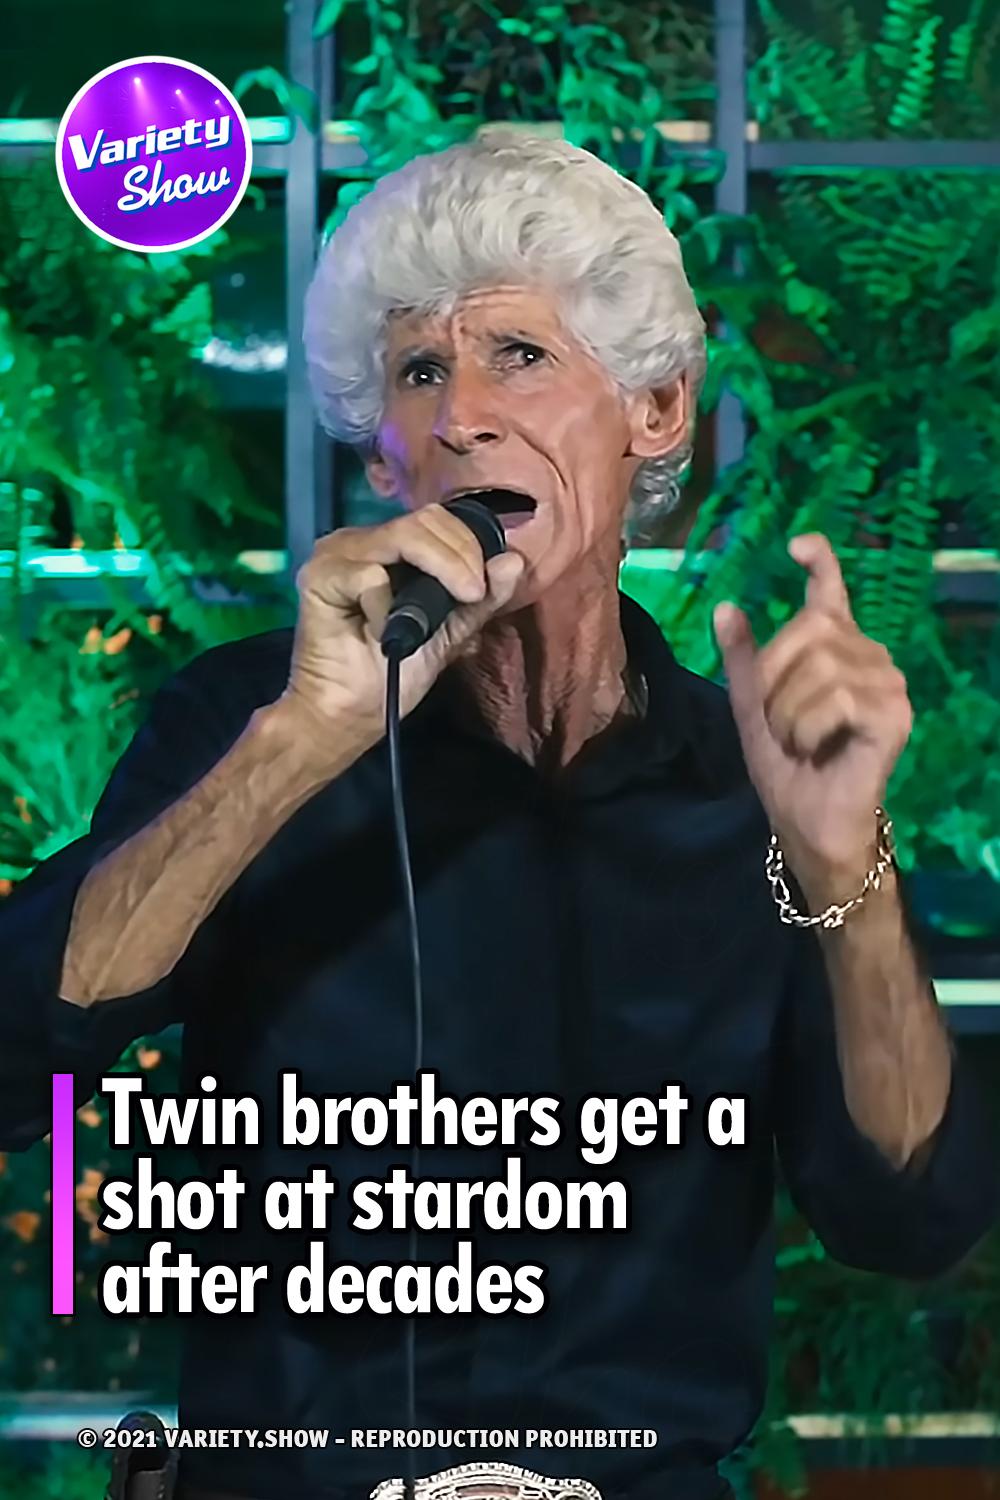 Twin brothers get a shot at stardom after decades